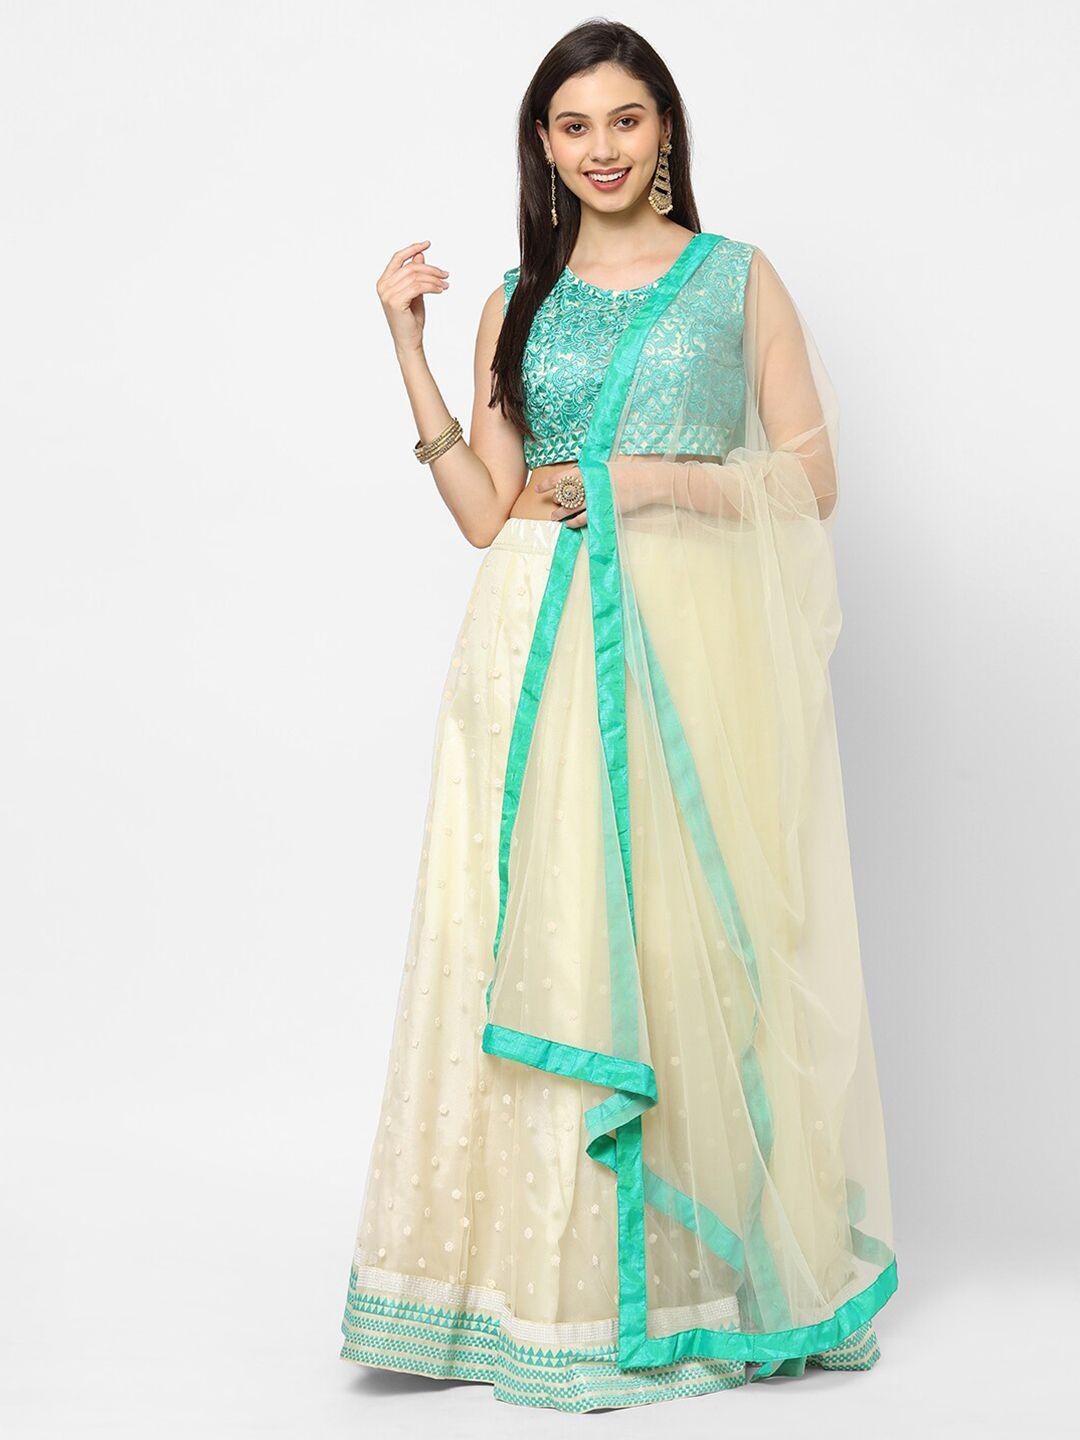 redround cream-coloured & turquoise blue embroidered thread work semi-stitched lehenga & unstitched blouse